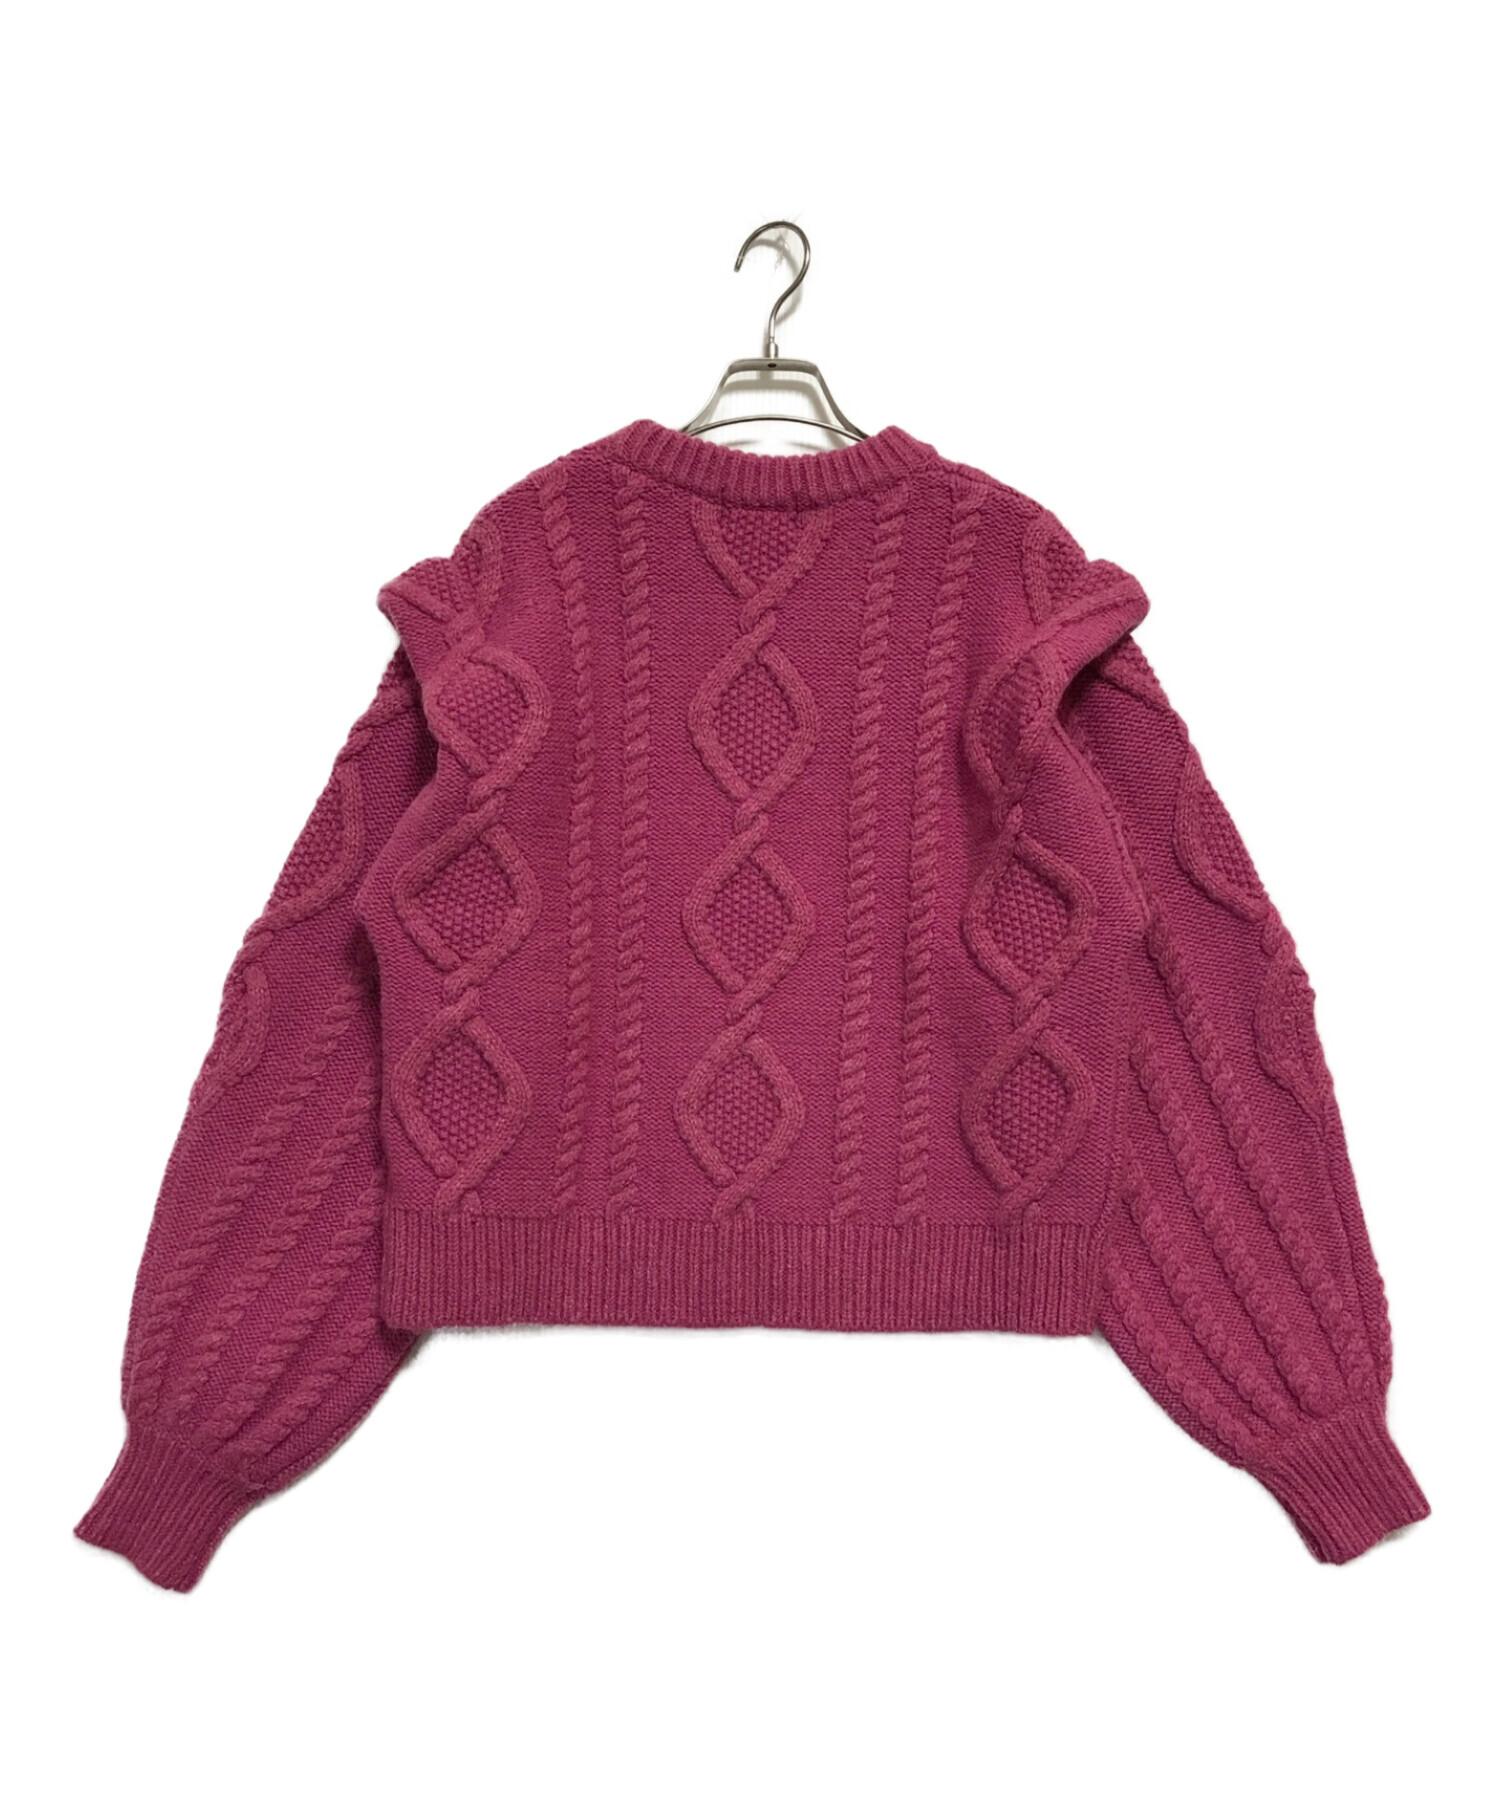 CLANE (クラネ) BELL SLEEVE TURTLE KNIT TOPS ピンク サイズ:1(下記参照)